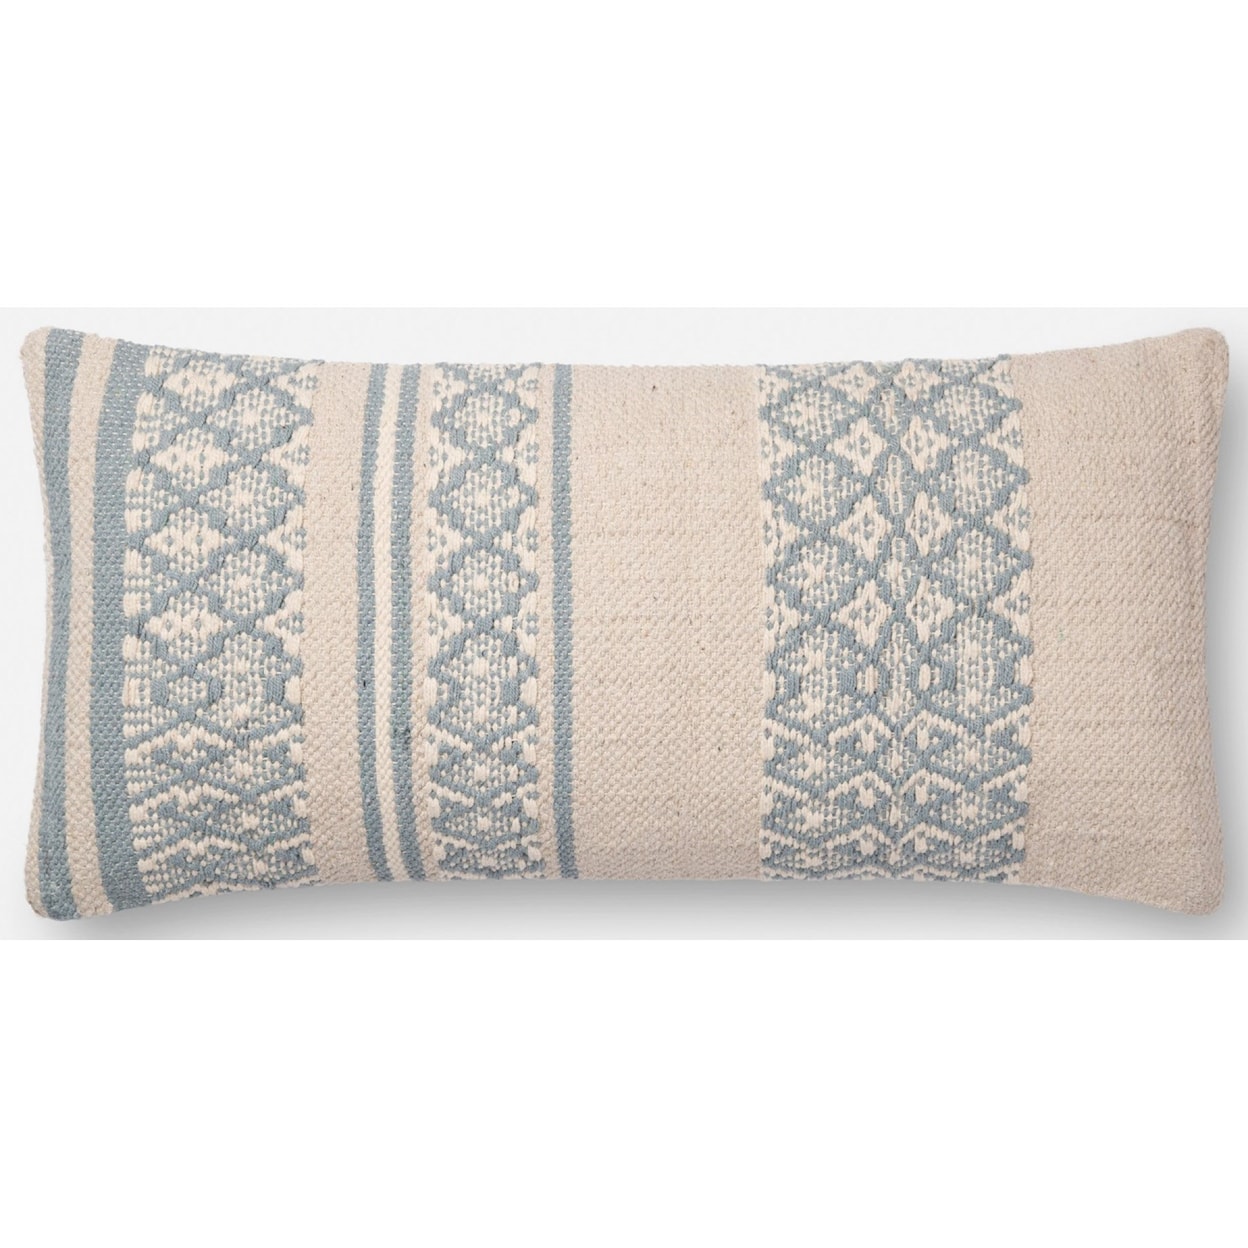 Magnolia Home by Joanna Gaines for Loloi Accent Pillows 12" x 27" Polyester Pillow